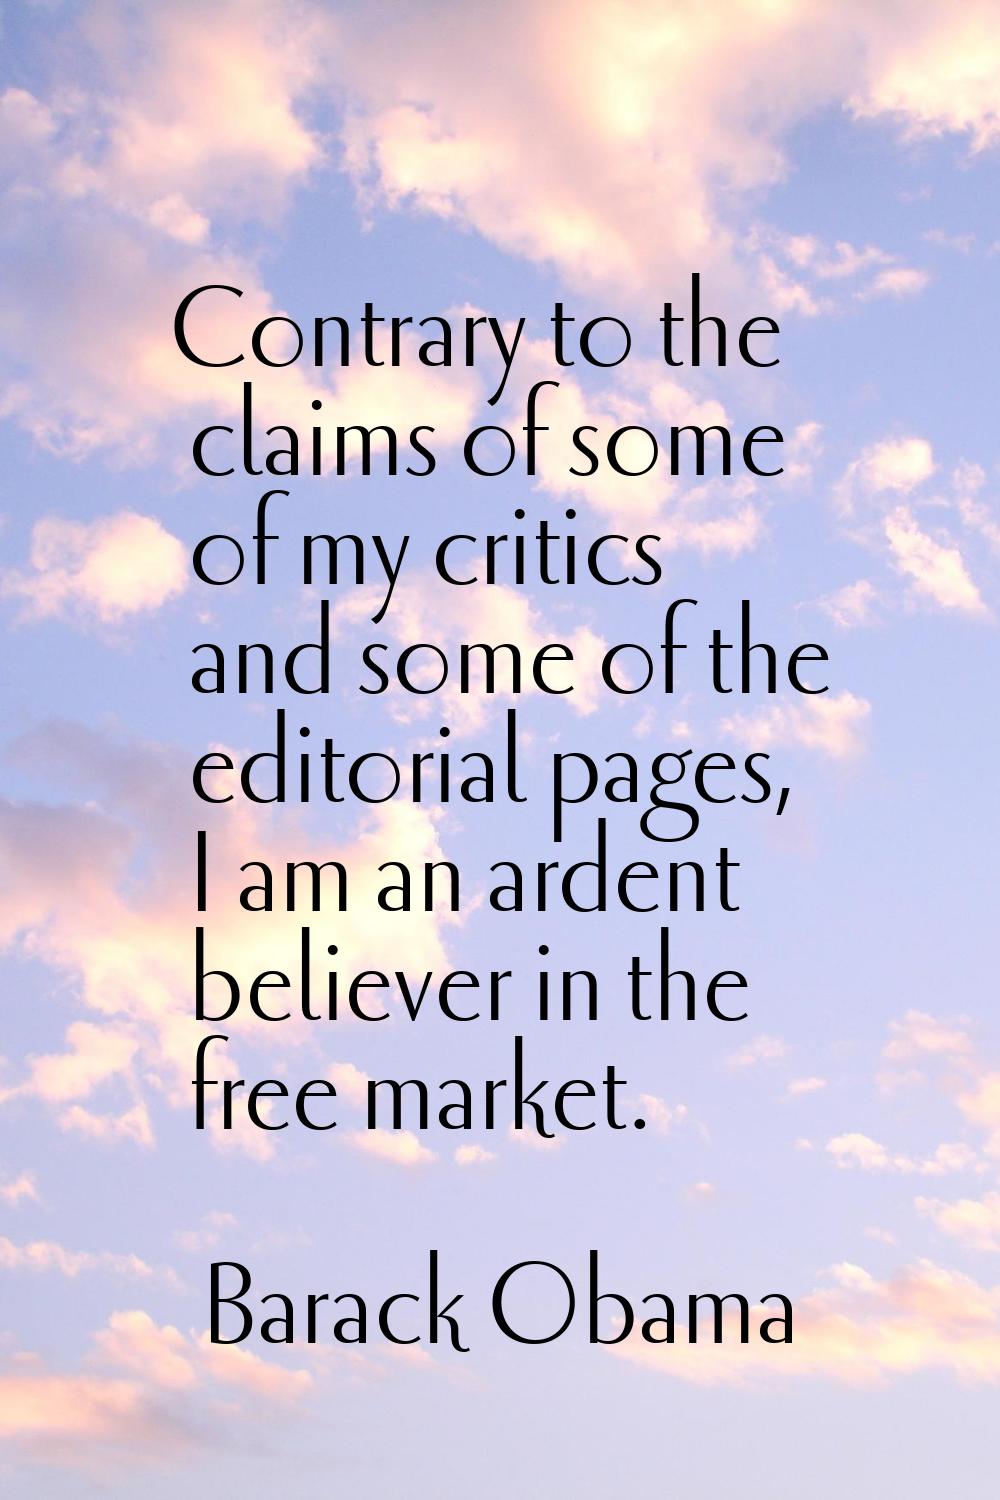 Contrary to the claims of some of my critics and some of the editorial pages, I am an ardent believ